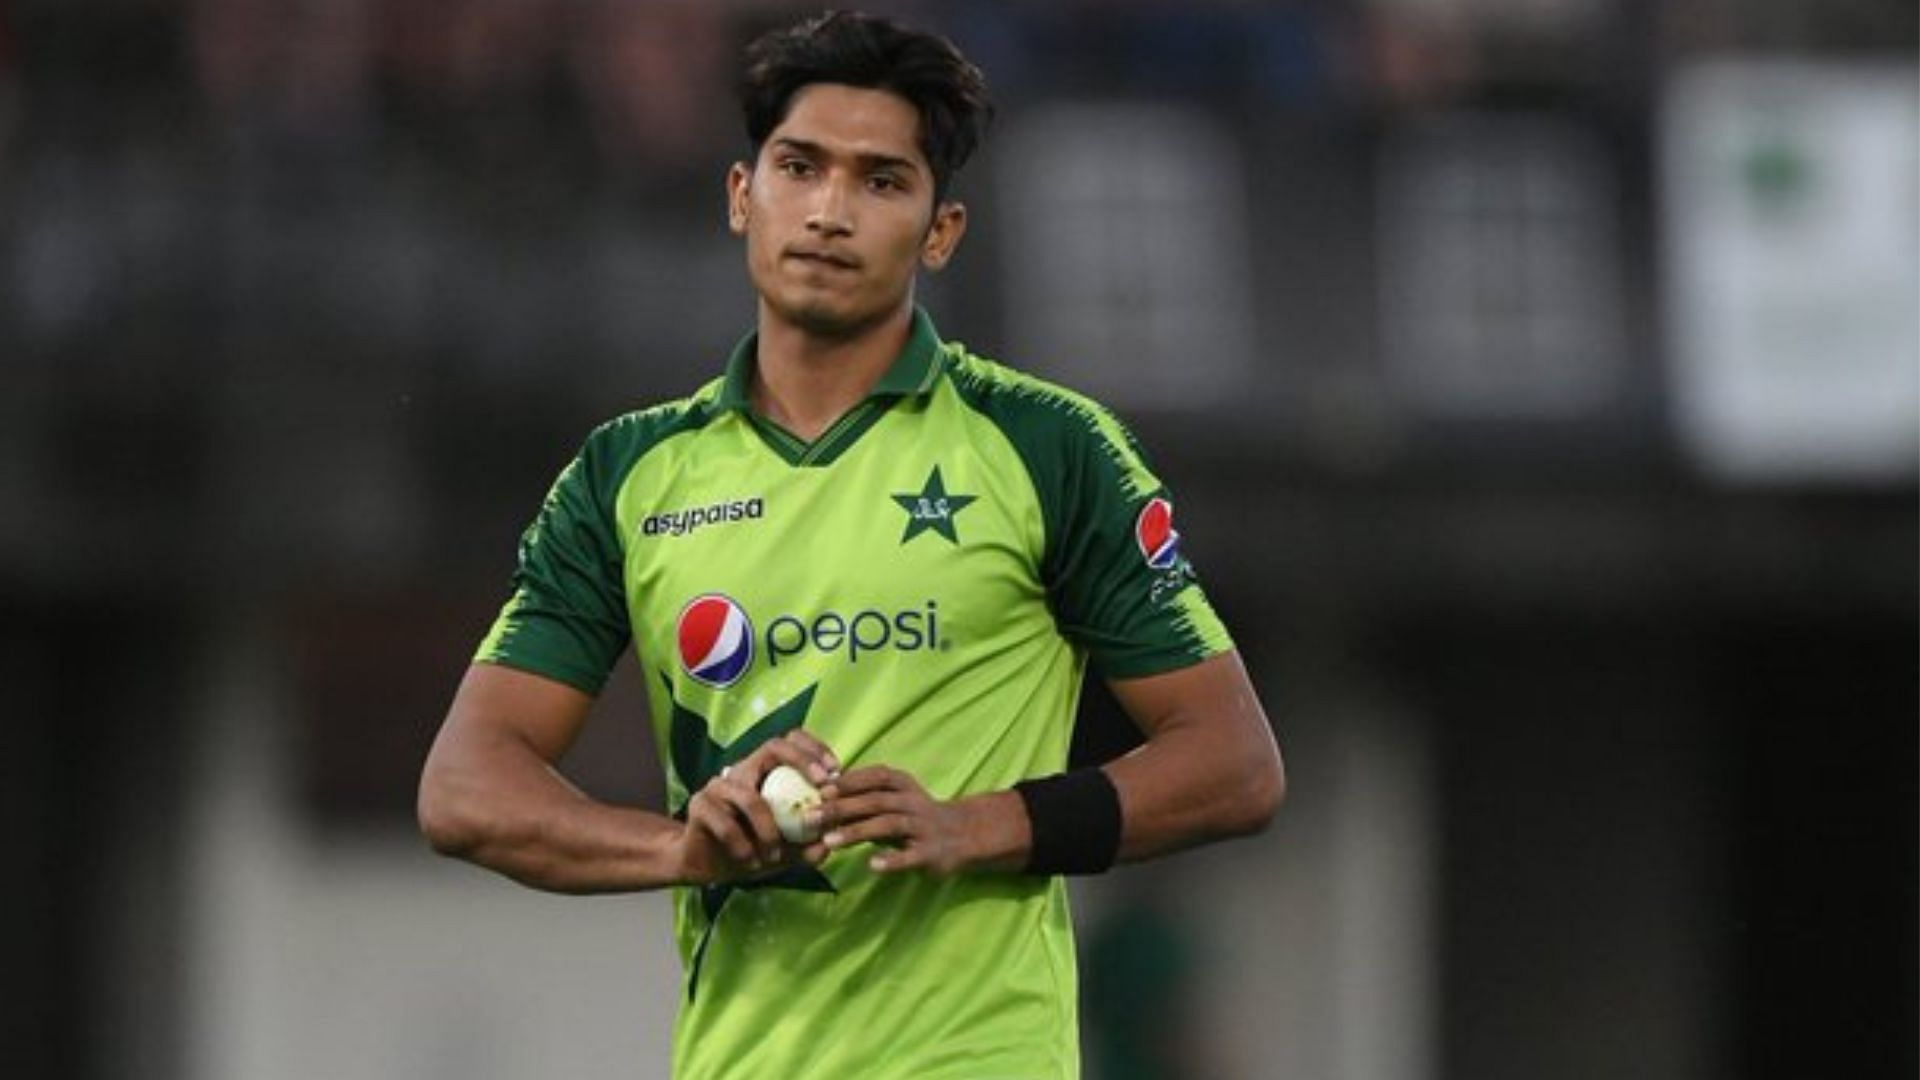 Hasnain is arguably the fastest Pakistan bowler currently.